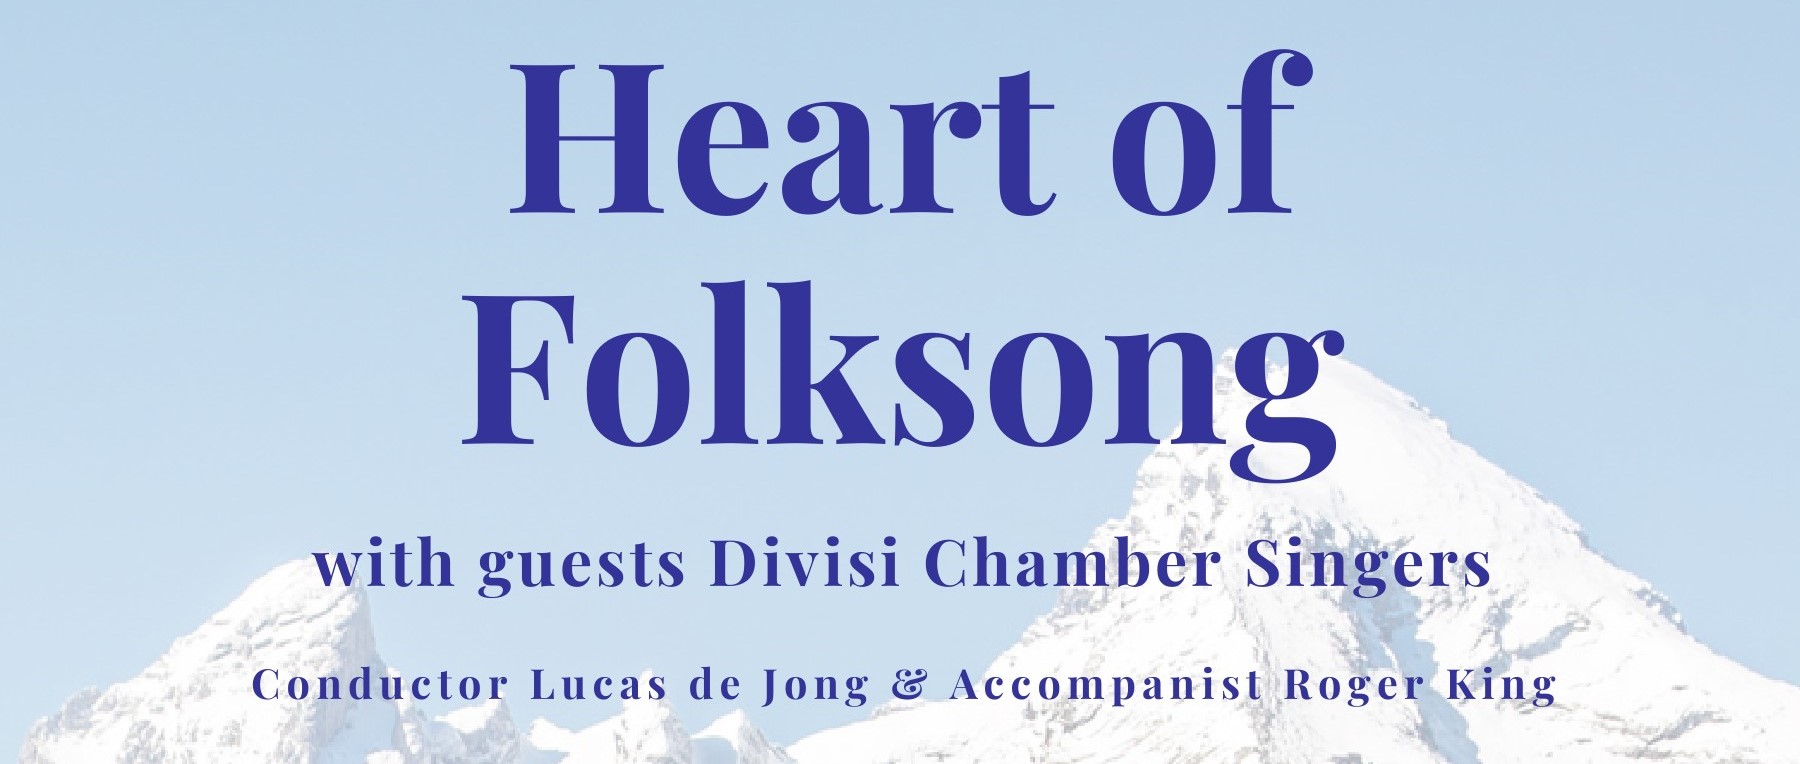 Heart of Folksong